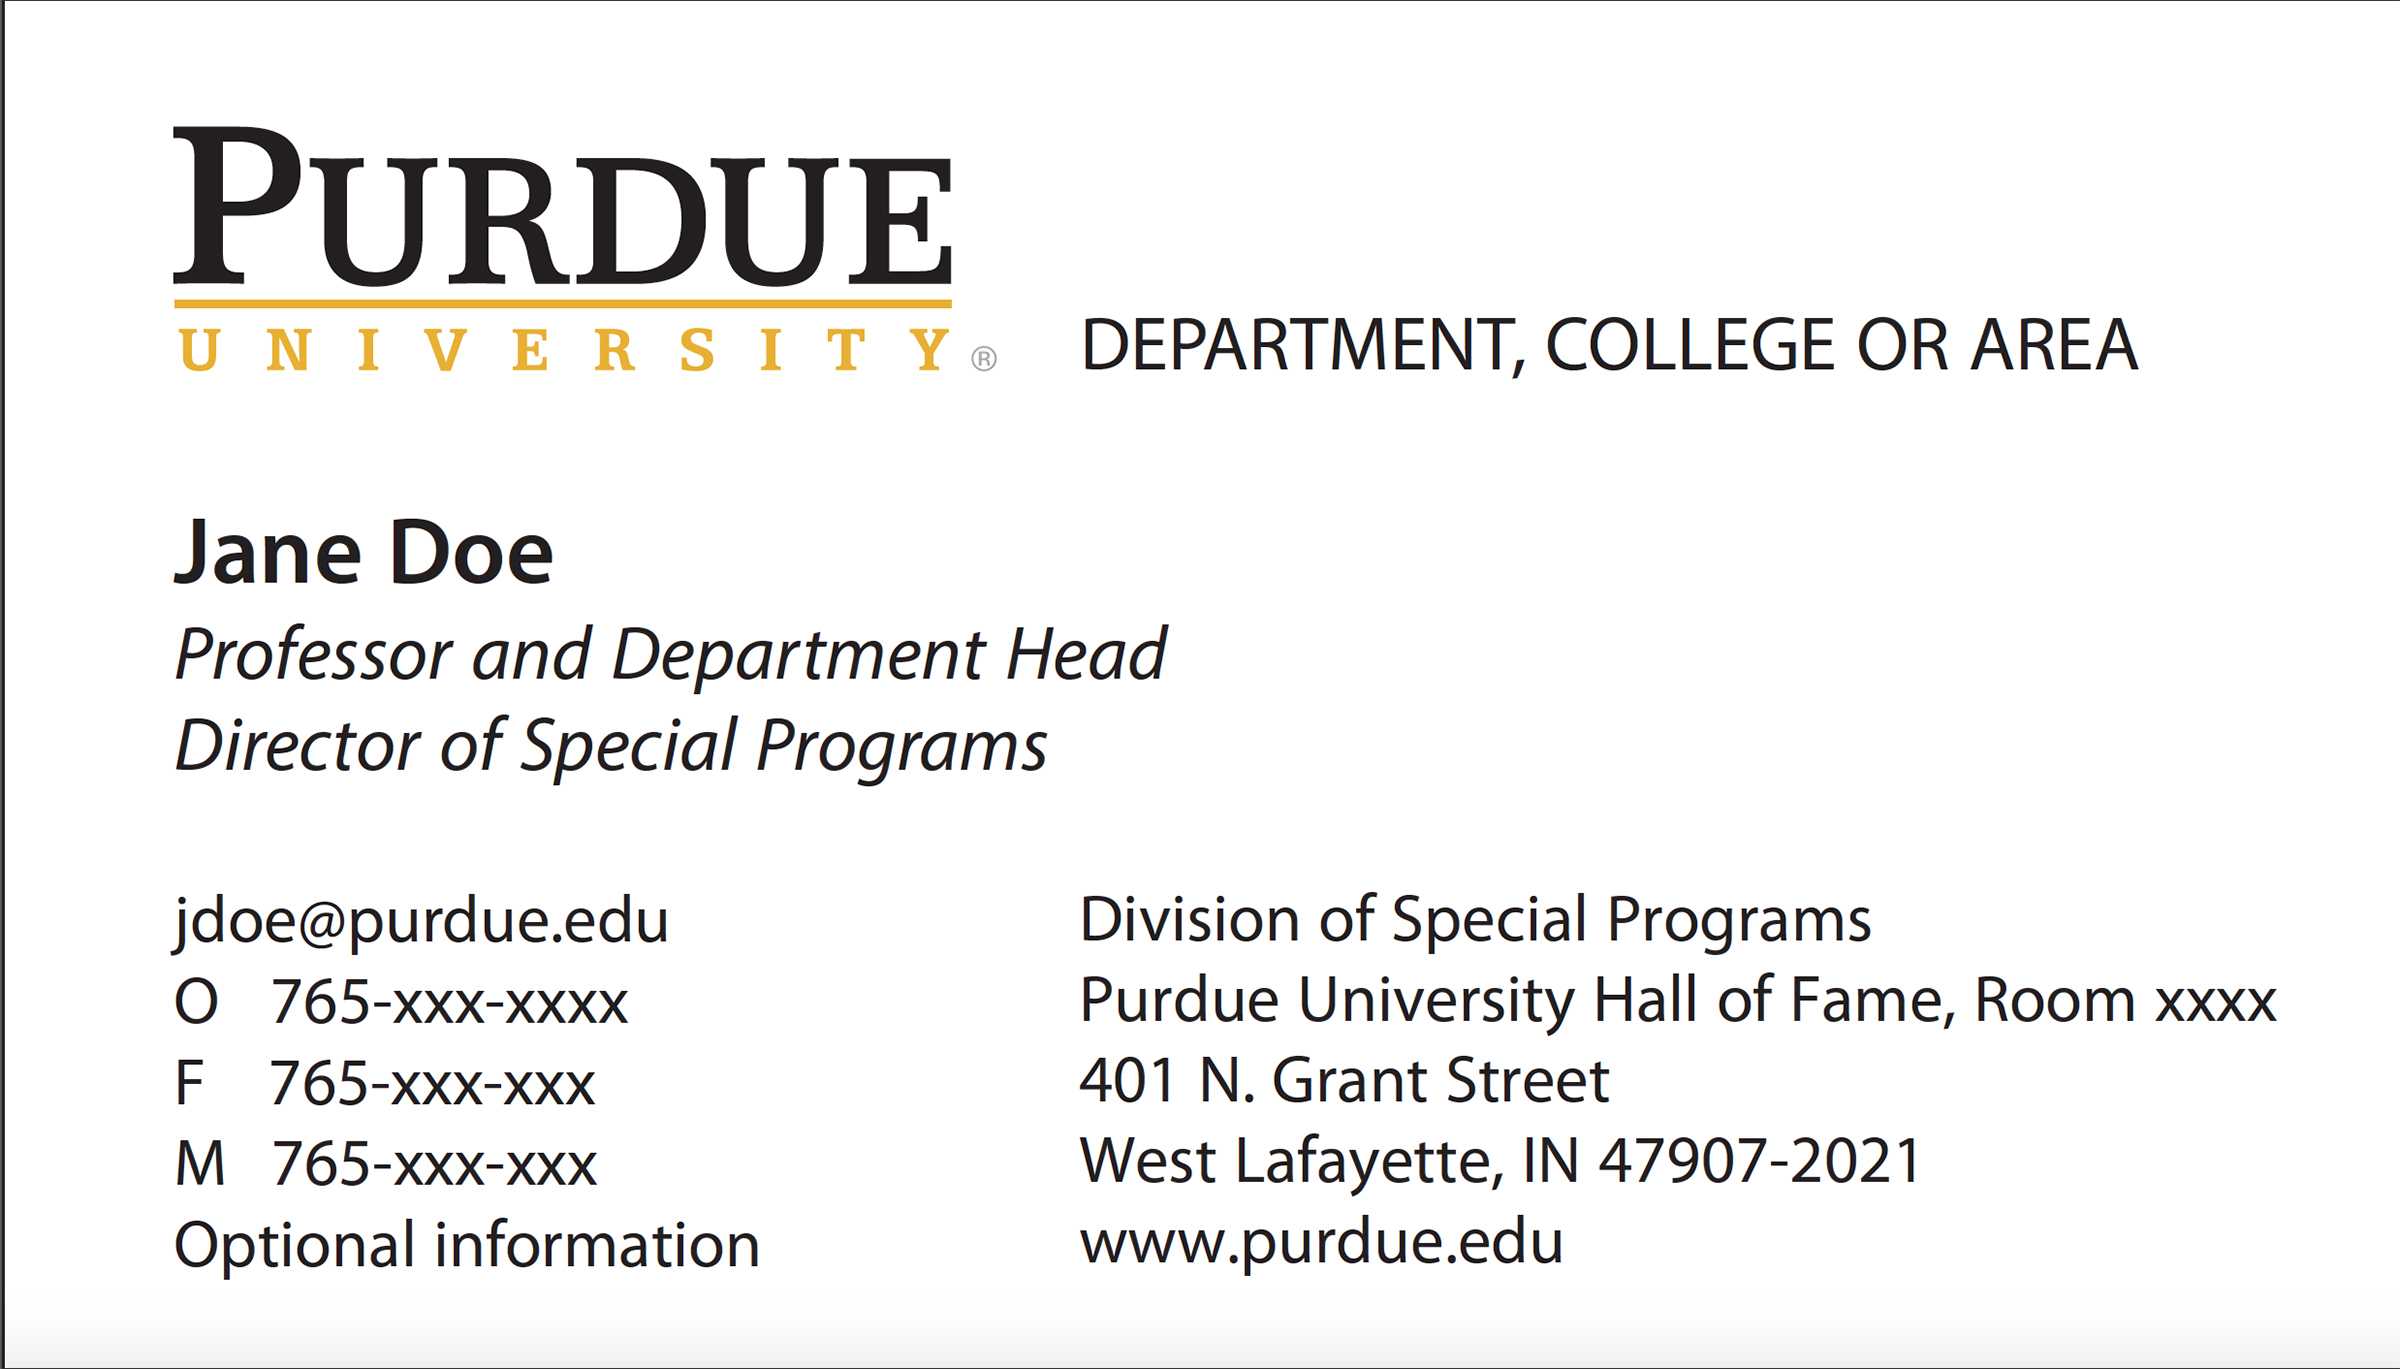 New Business Card Template Now Online – Purdue University News With Regard To Graduate Student Business Cards Template